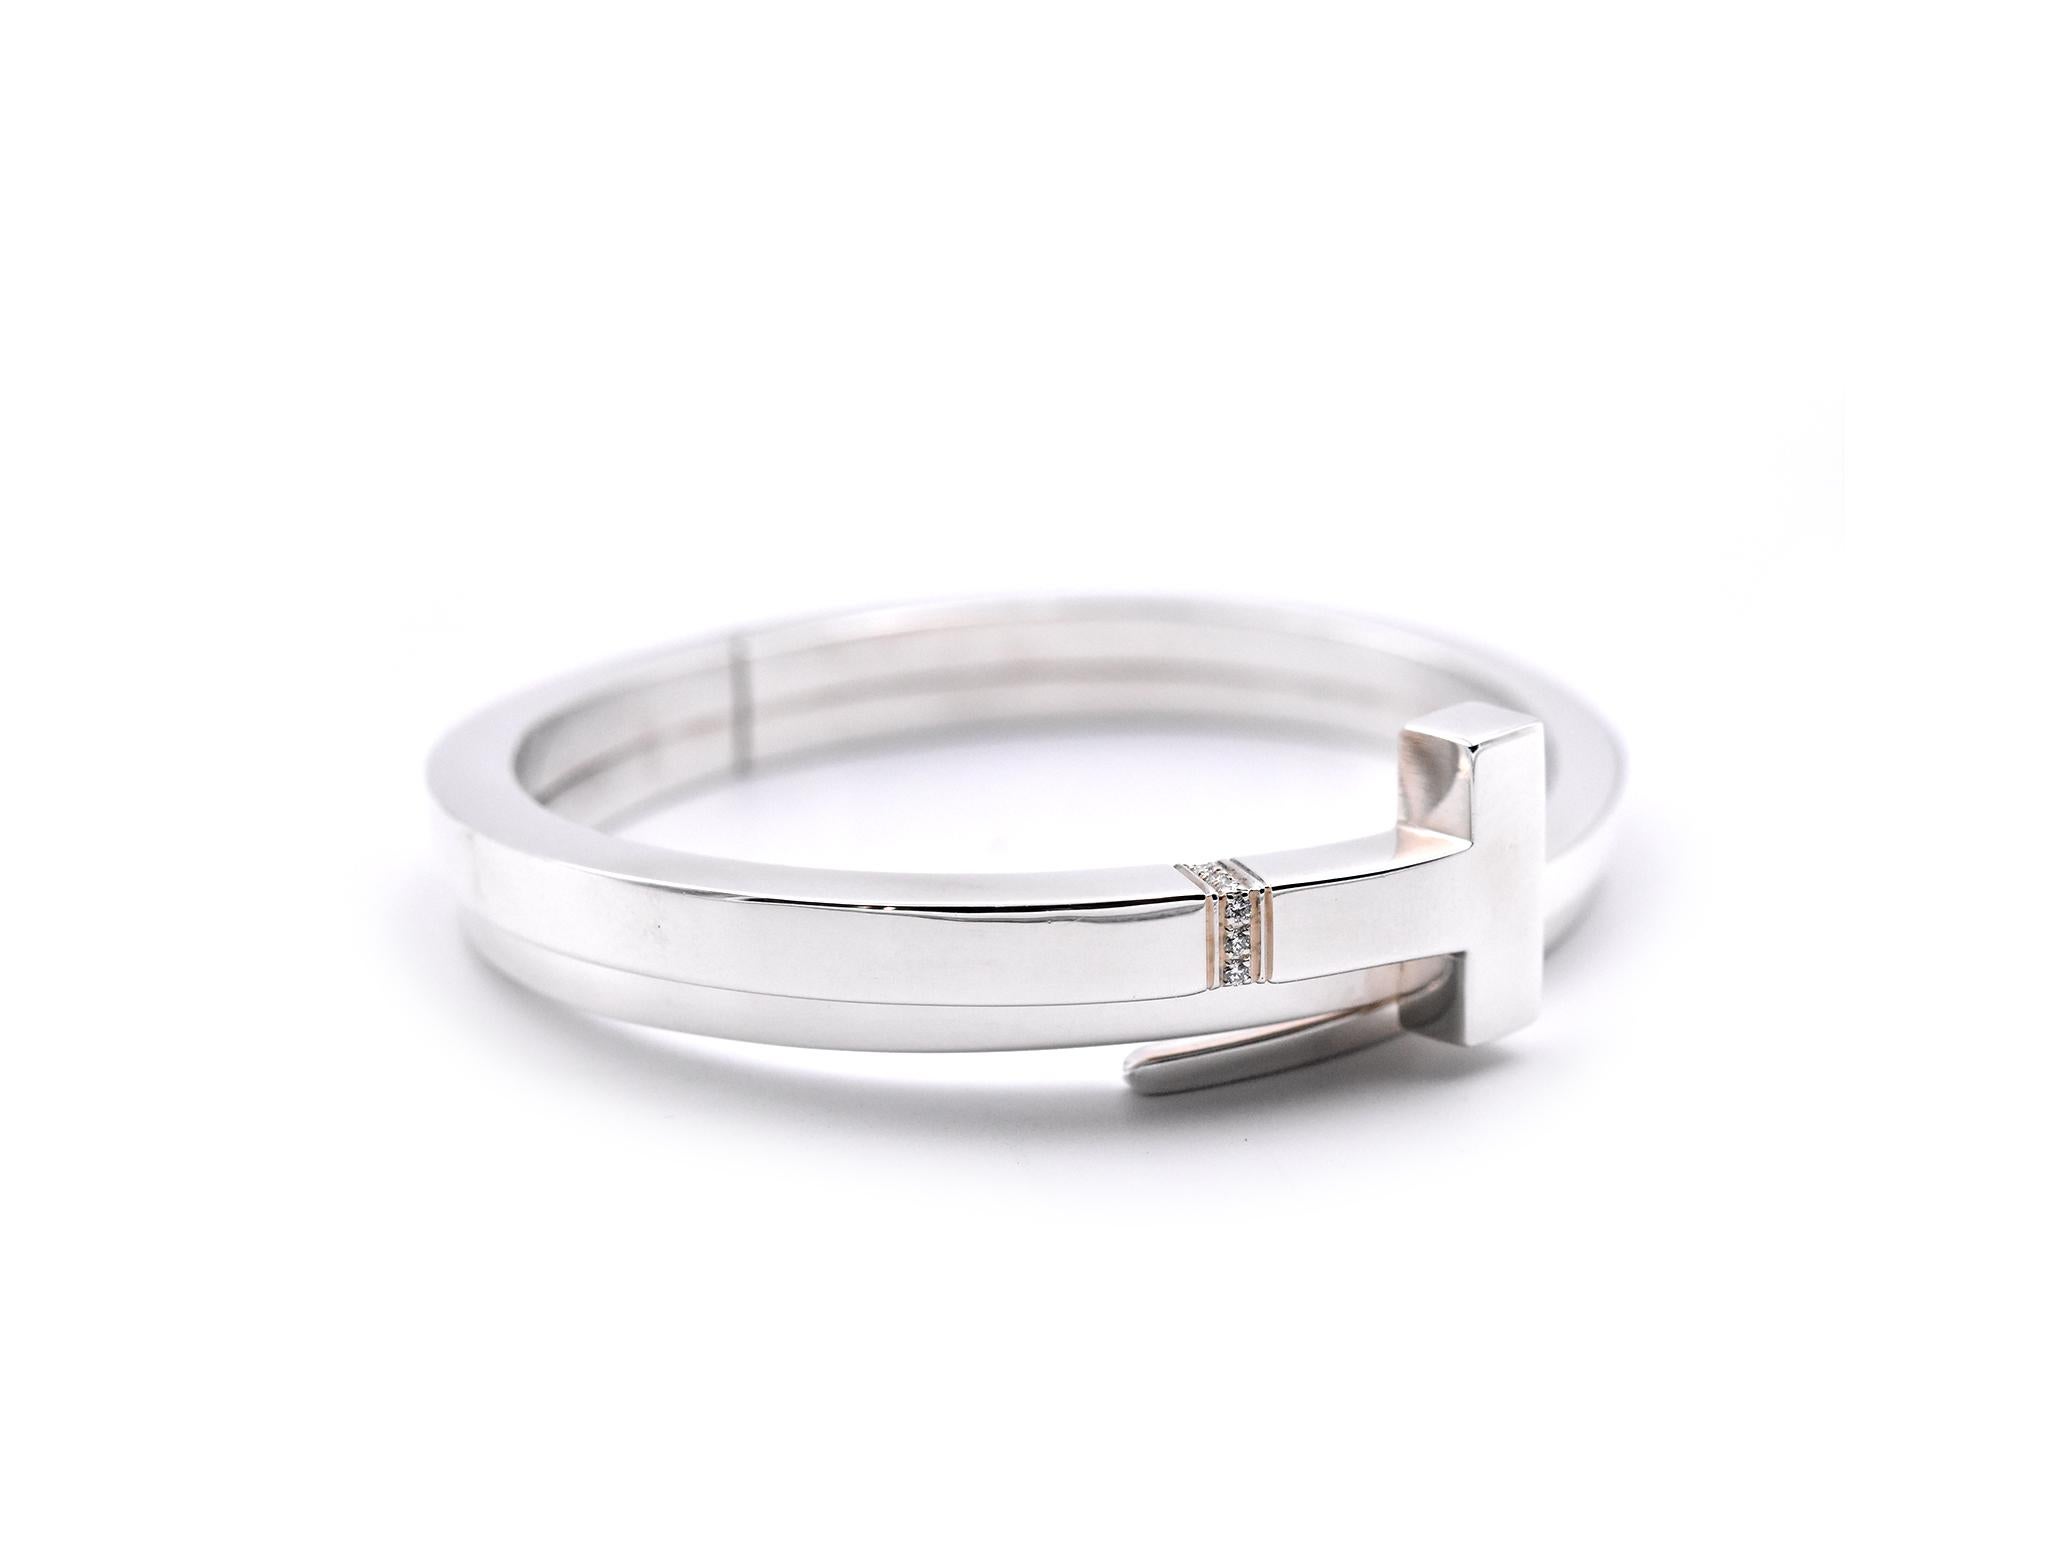 Designer: Tiffany & Co.
Material: sterling silver
Diamonds: 9 round brilliant cuts = 0.10cttw
Dimensions: bracelet measures 7.15mm in width and will fit a 6 ½ inch wrist
Weight: 51.50 grams
